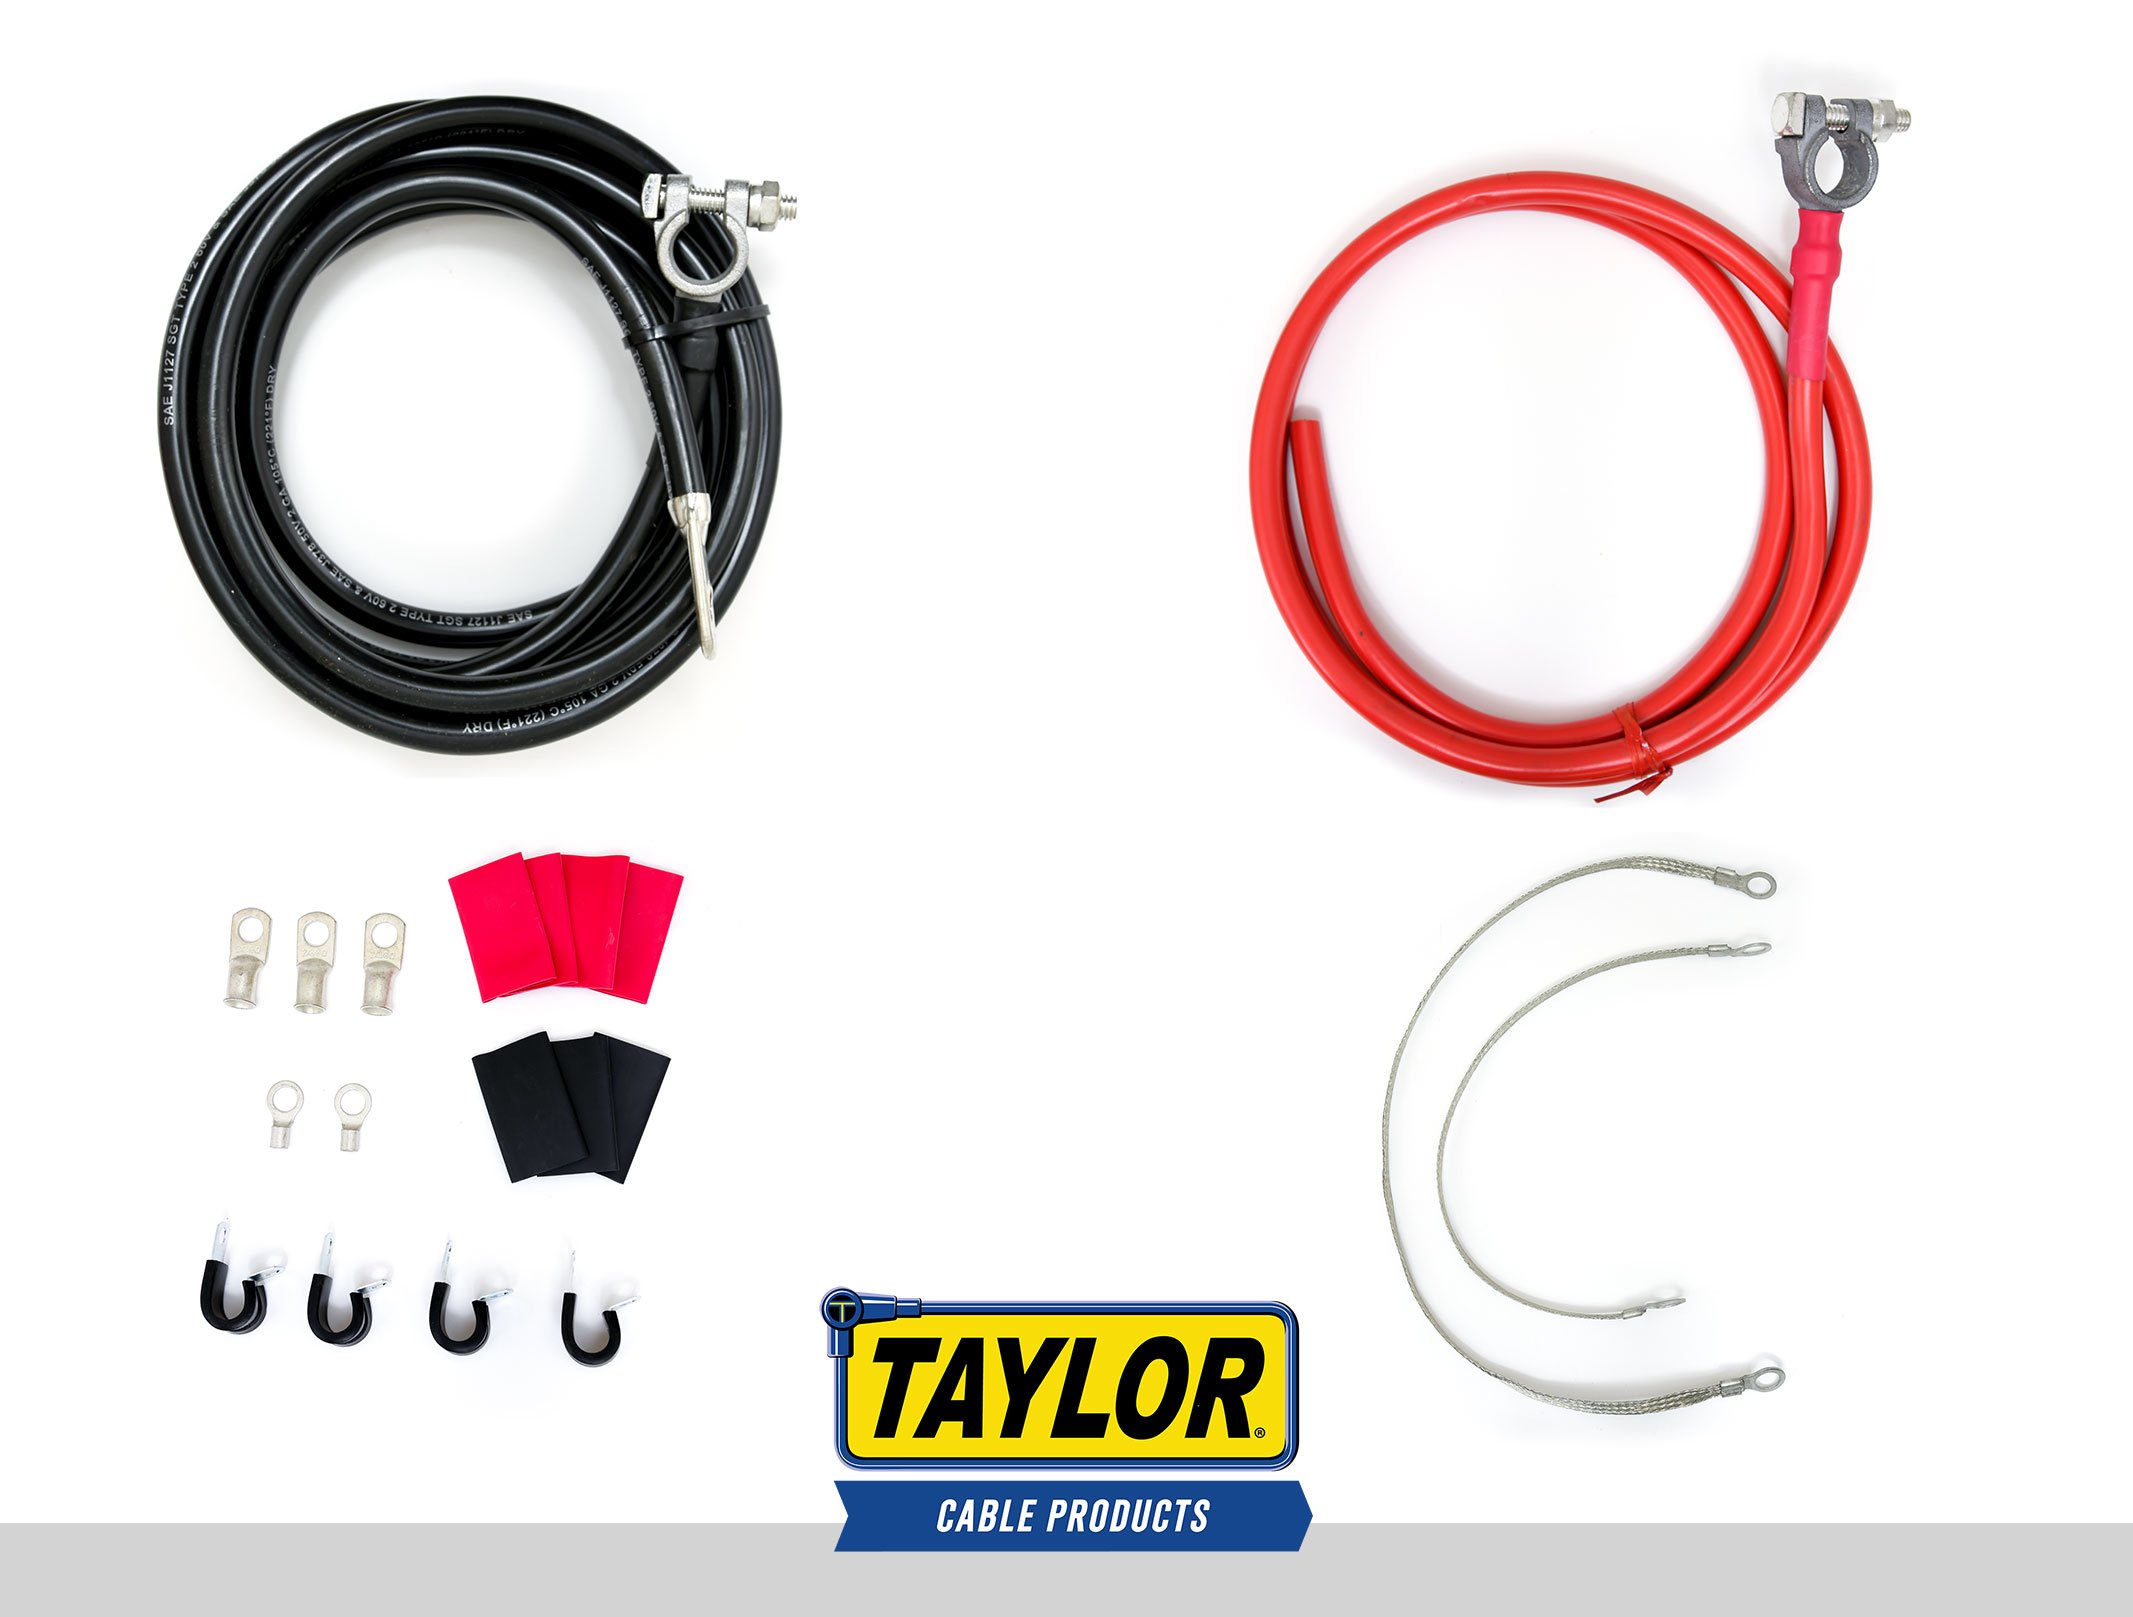 Taylor Cable 20012 Diamondback Shielded Battery Cable 